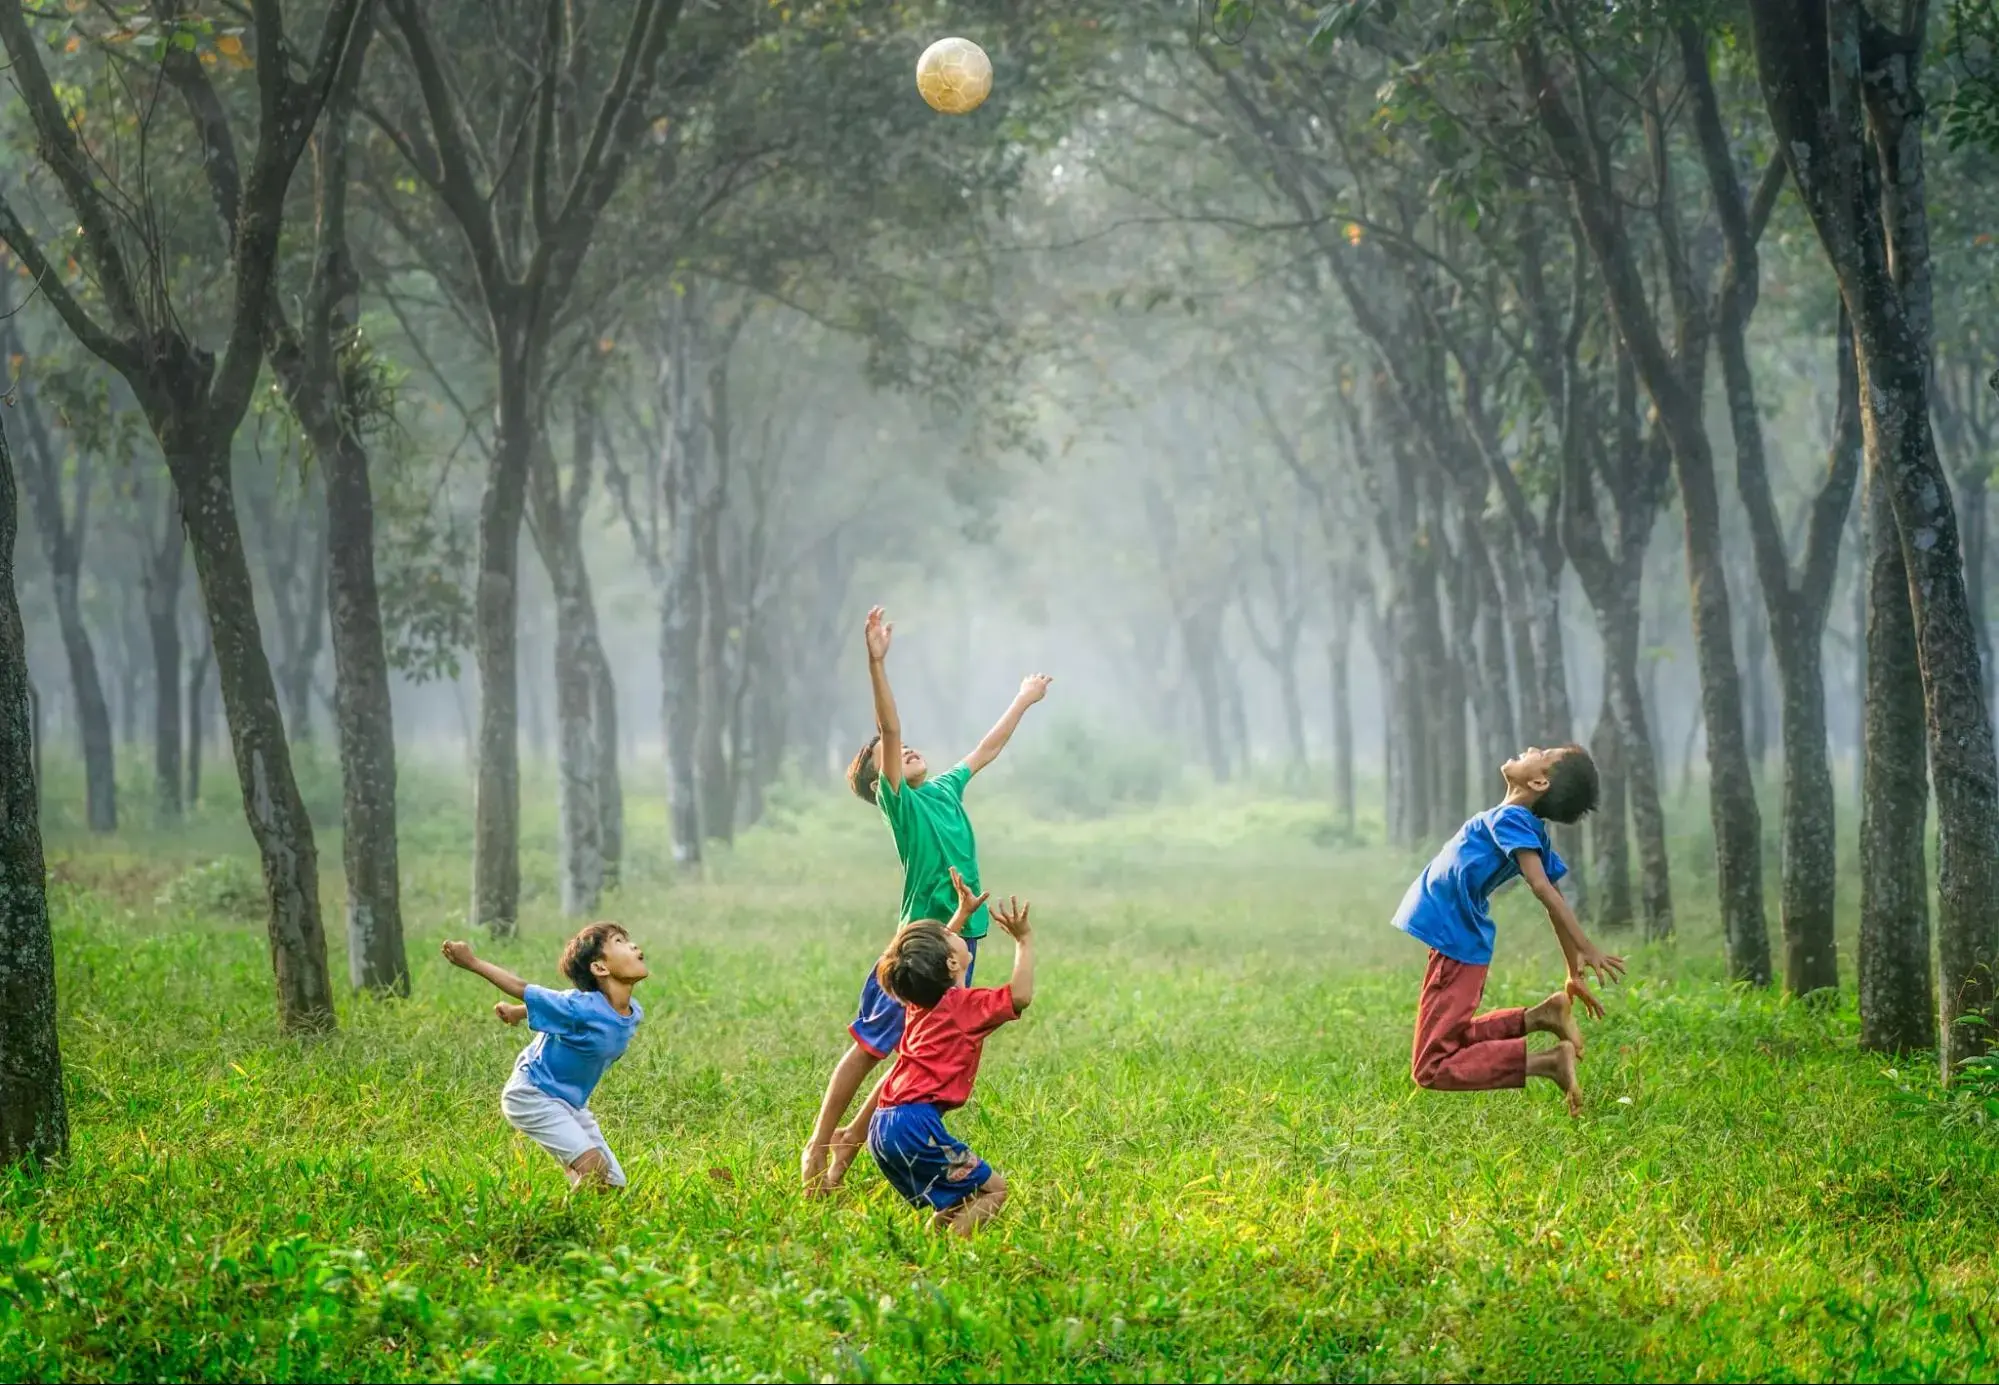 Children who can play freely because they have Life Insurance.